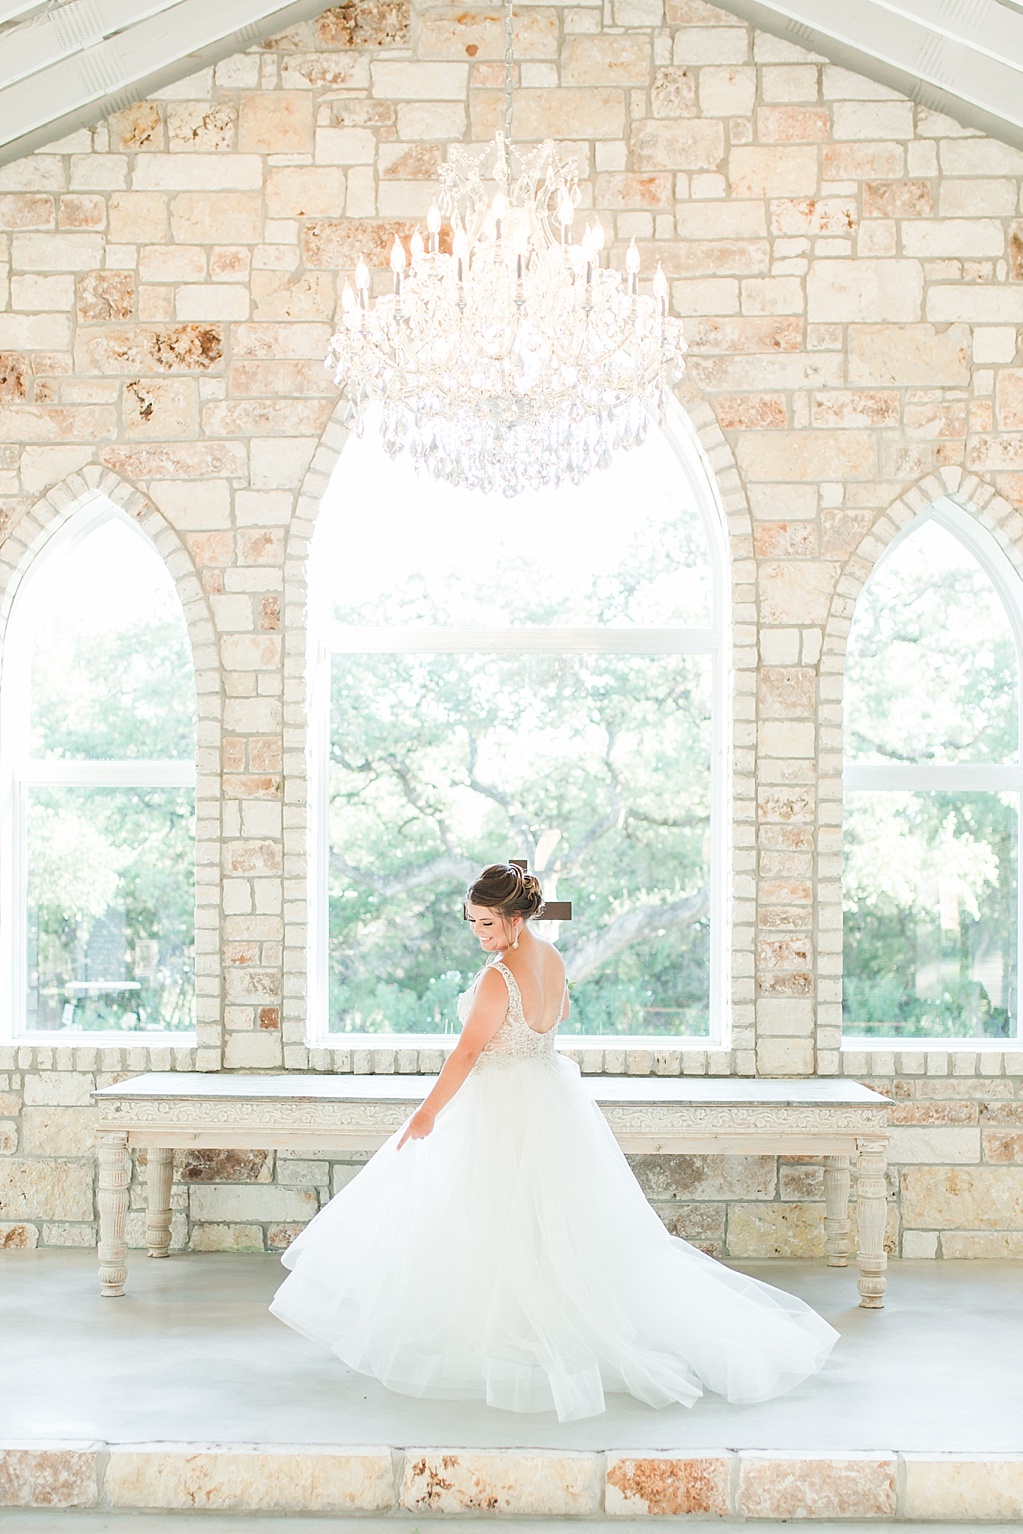 Summer Bridal Session at The Chandelier of Gruene in New Braunfels Texas 0010